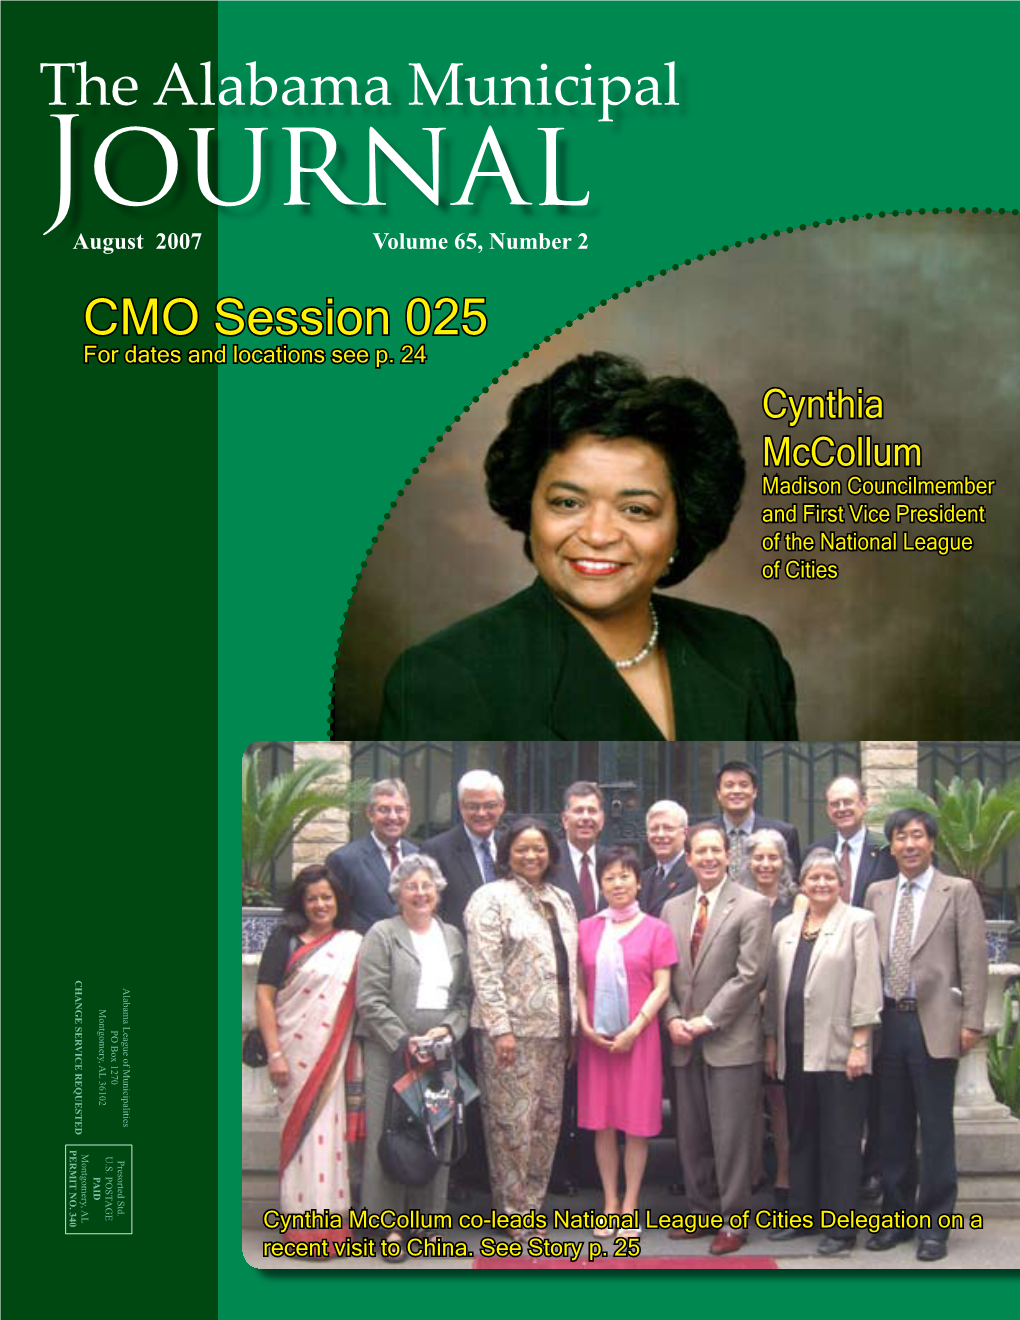 Journal August 2007 Volume 65, Number 2 CMO Session 025 for Dates and Locations See P